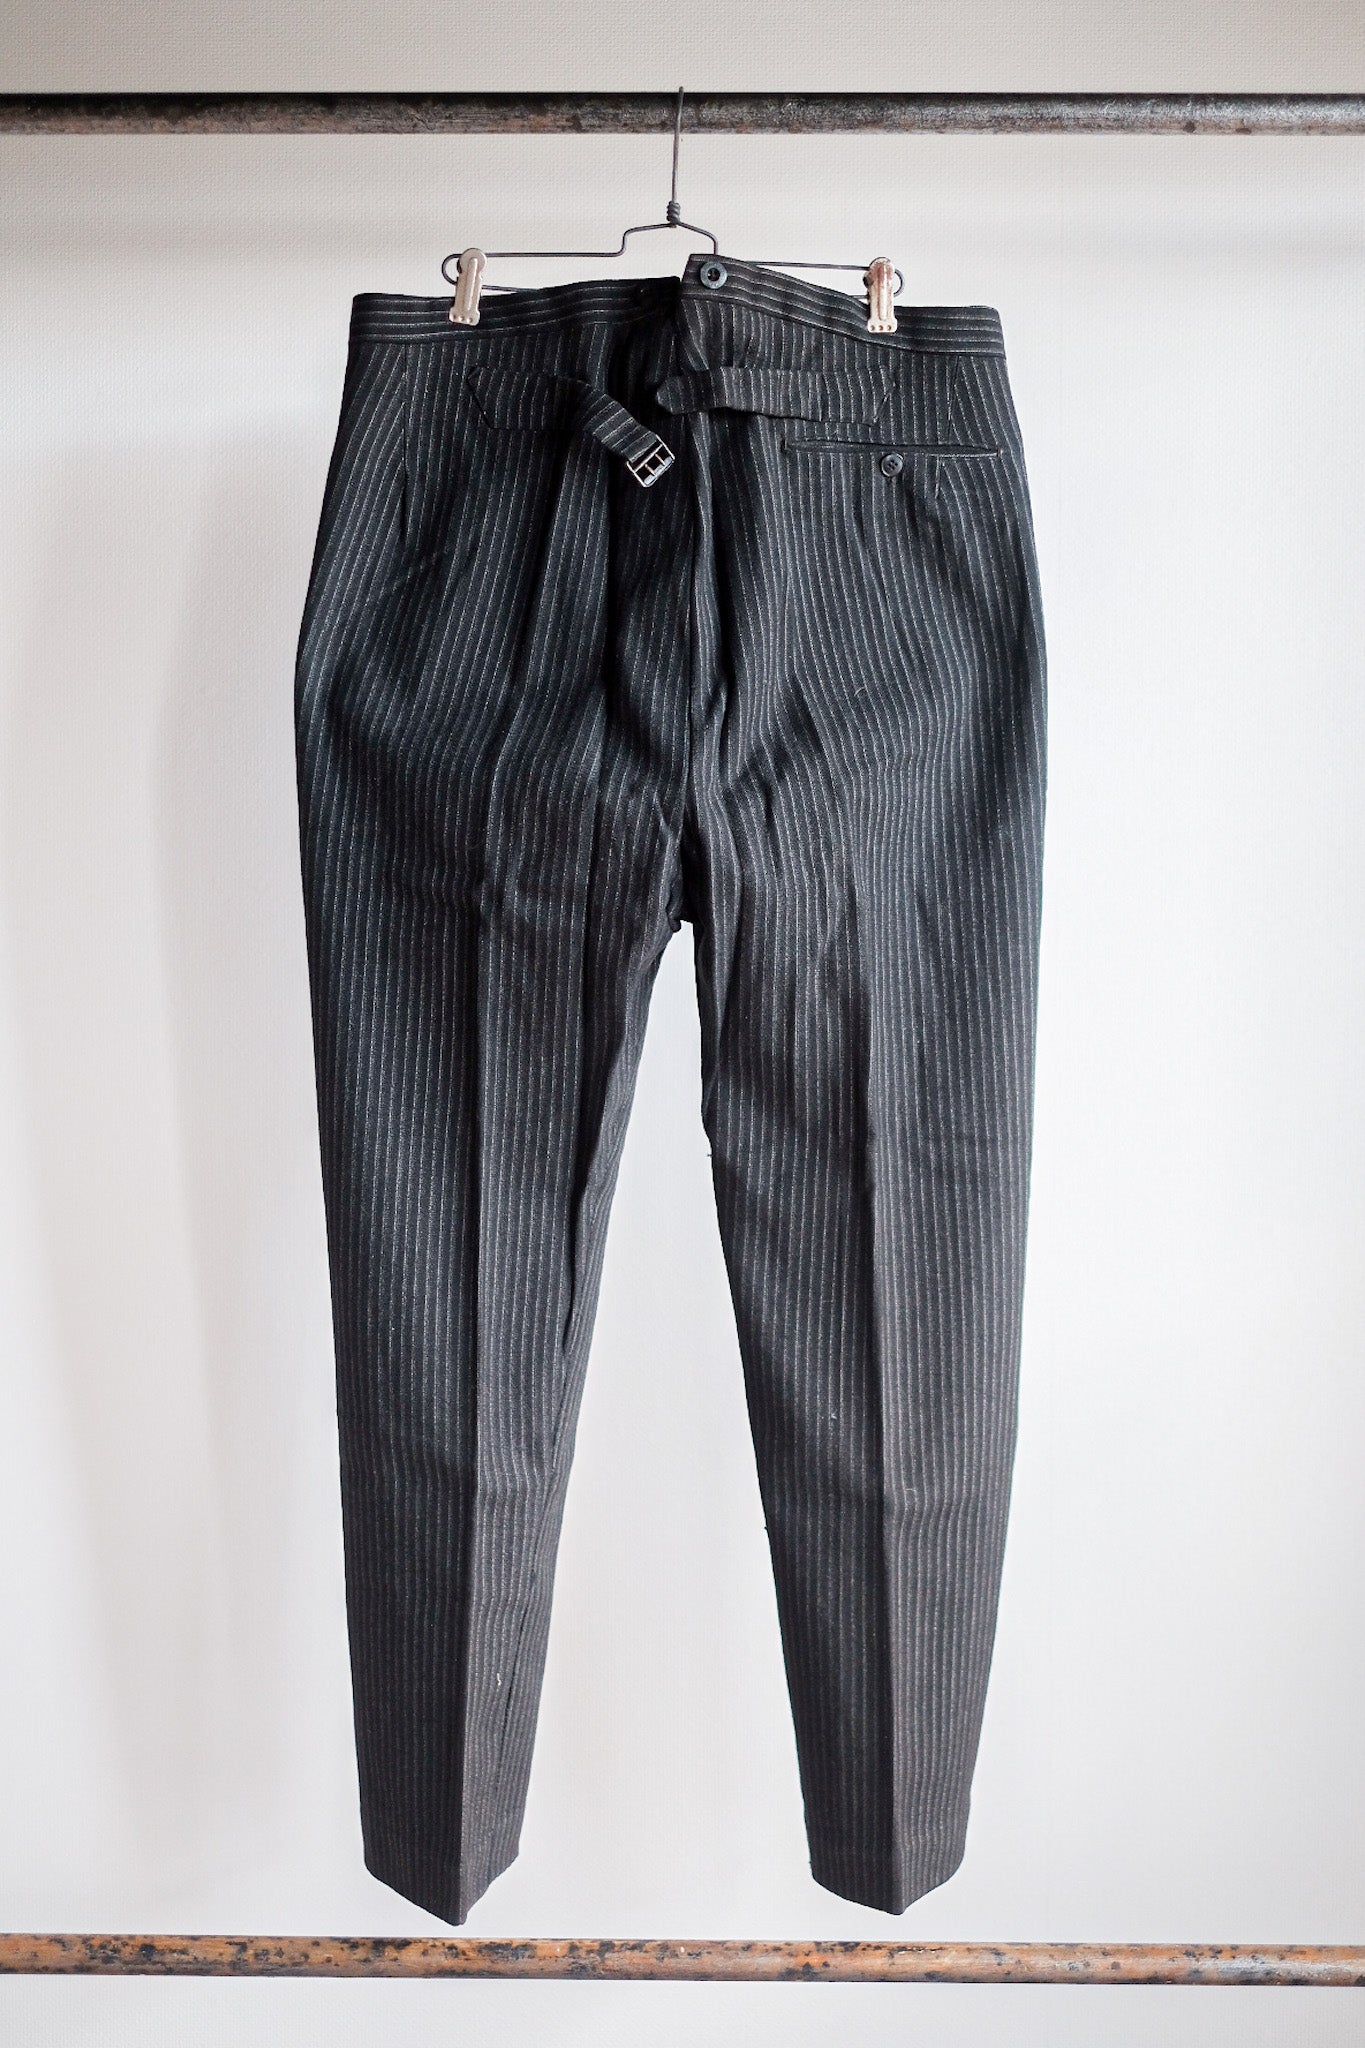 【~30's】French Vintage Wool Striped Work Pants